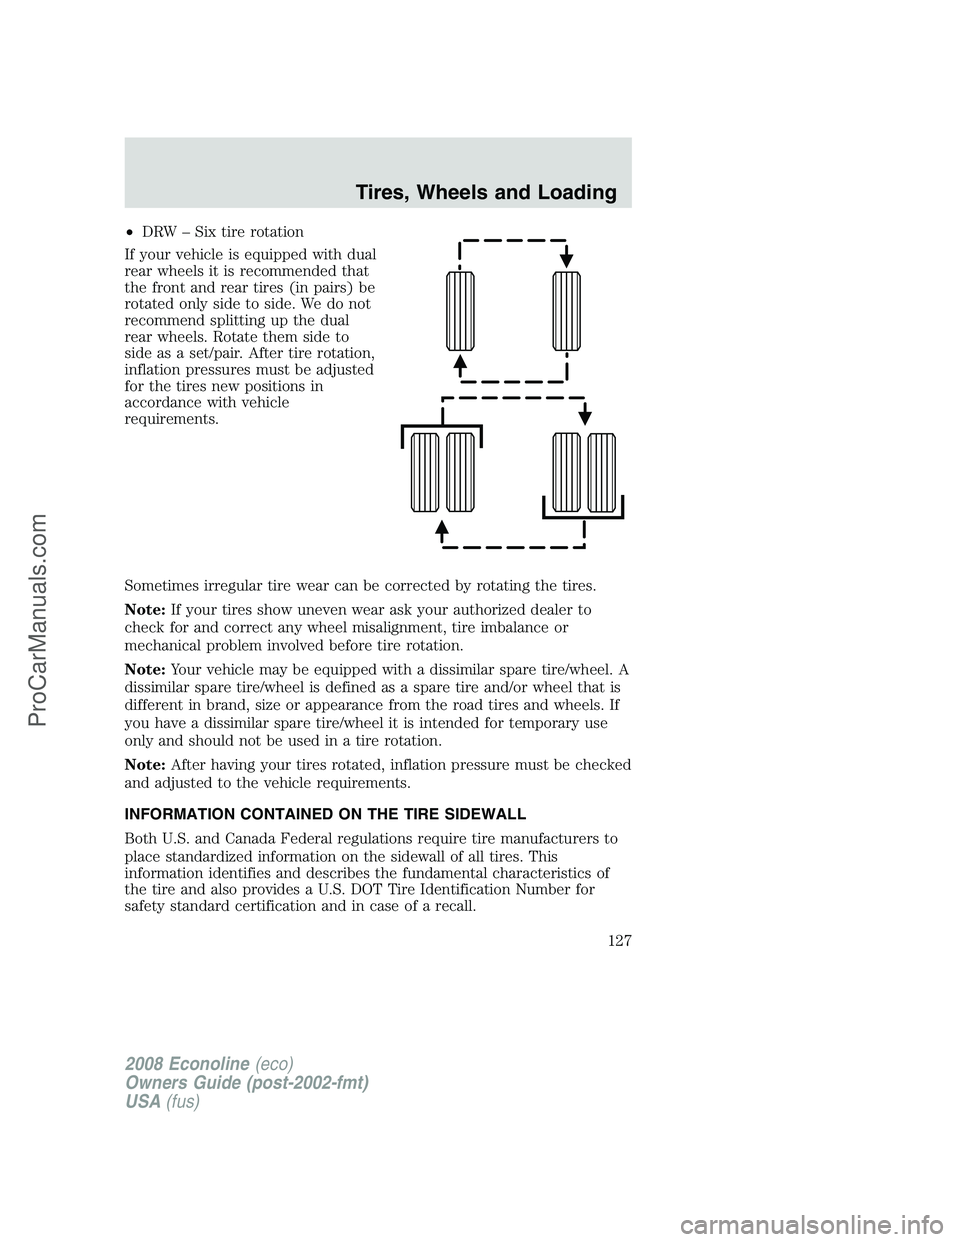 FORD ECONOLINE 2008  Owners Manual •DRW – Six tire rotation
If your vehicle is equipped with dual
rear wheels it is recommended that
the front and rear tires (in pairs) be
rotated only side to side. We do not
recommend splitting up